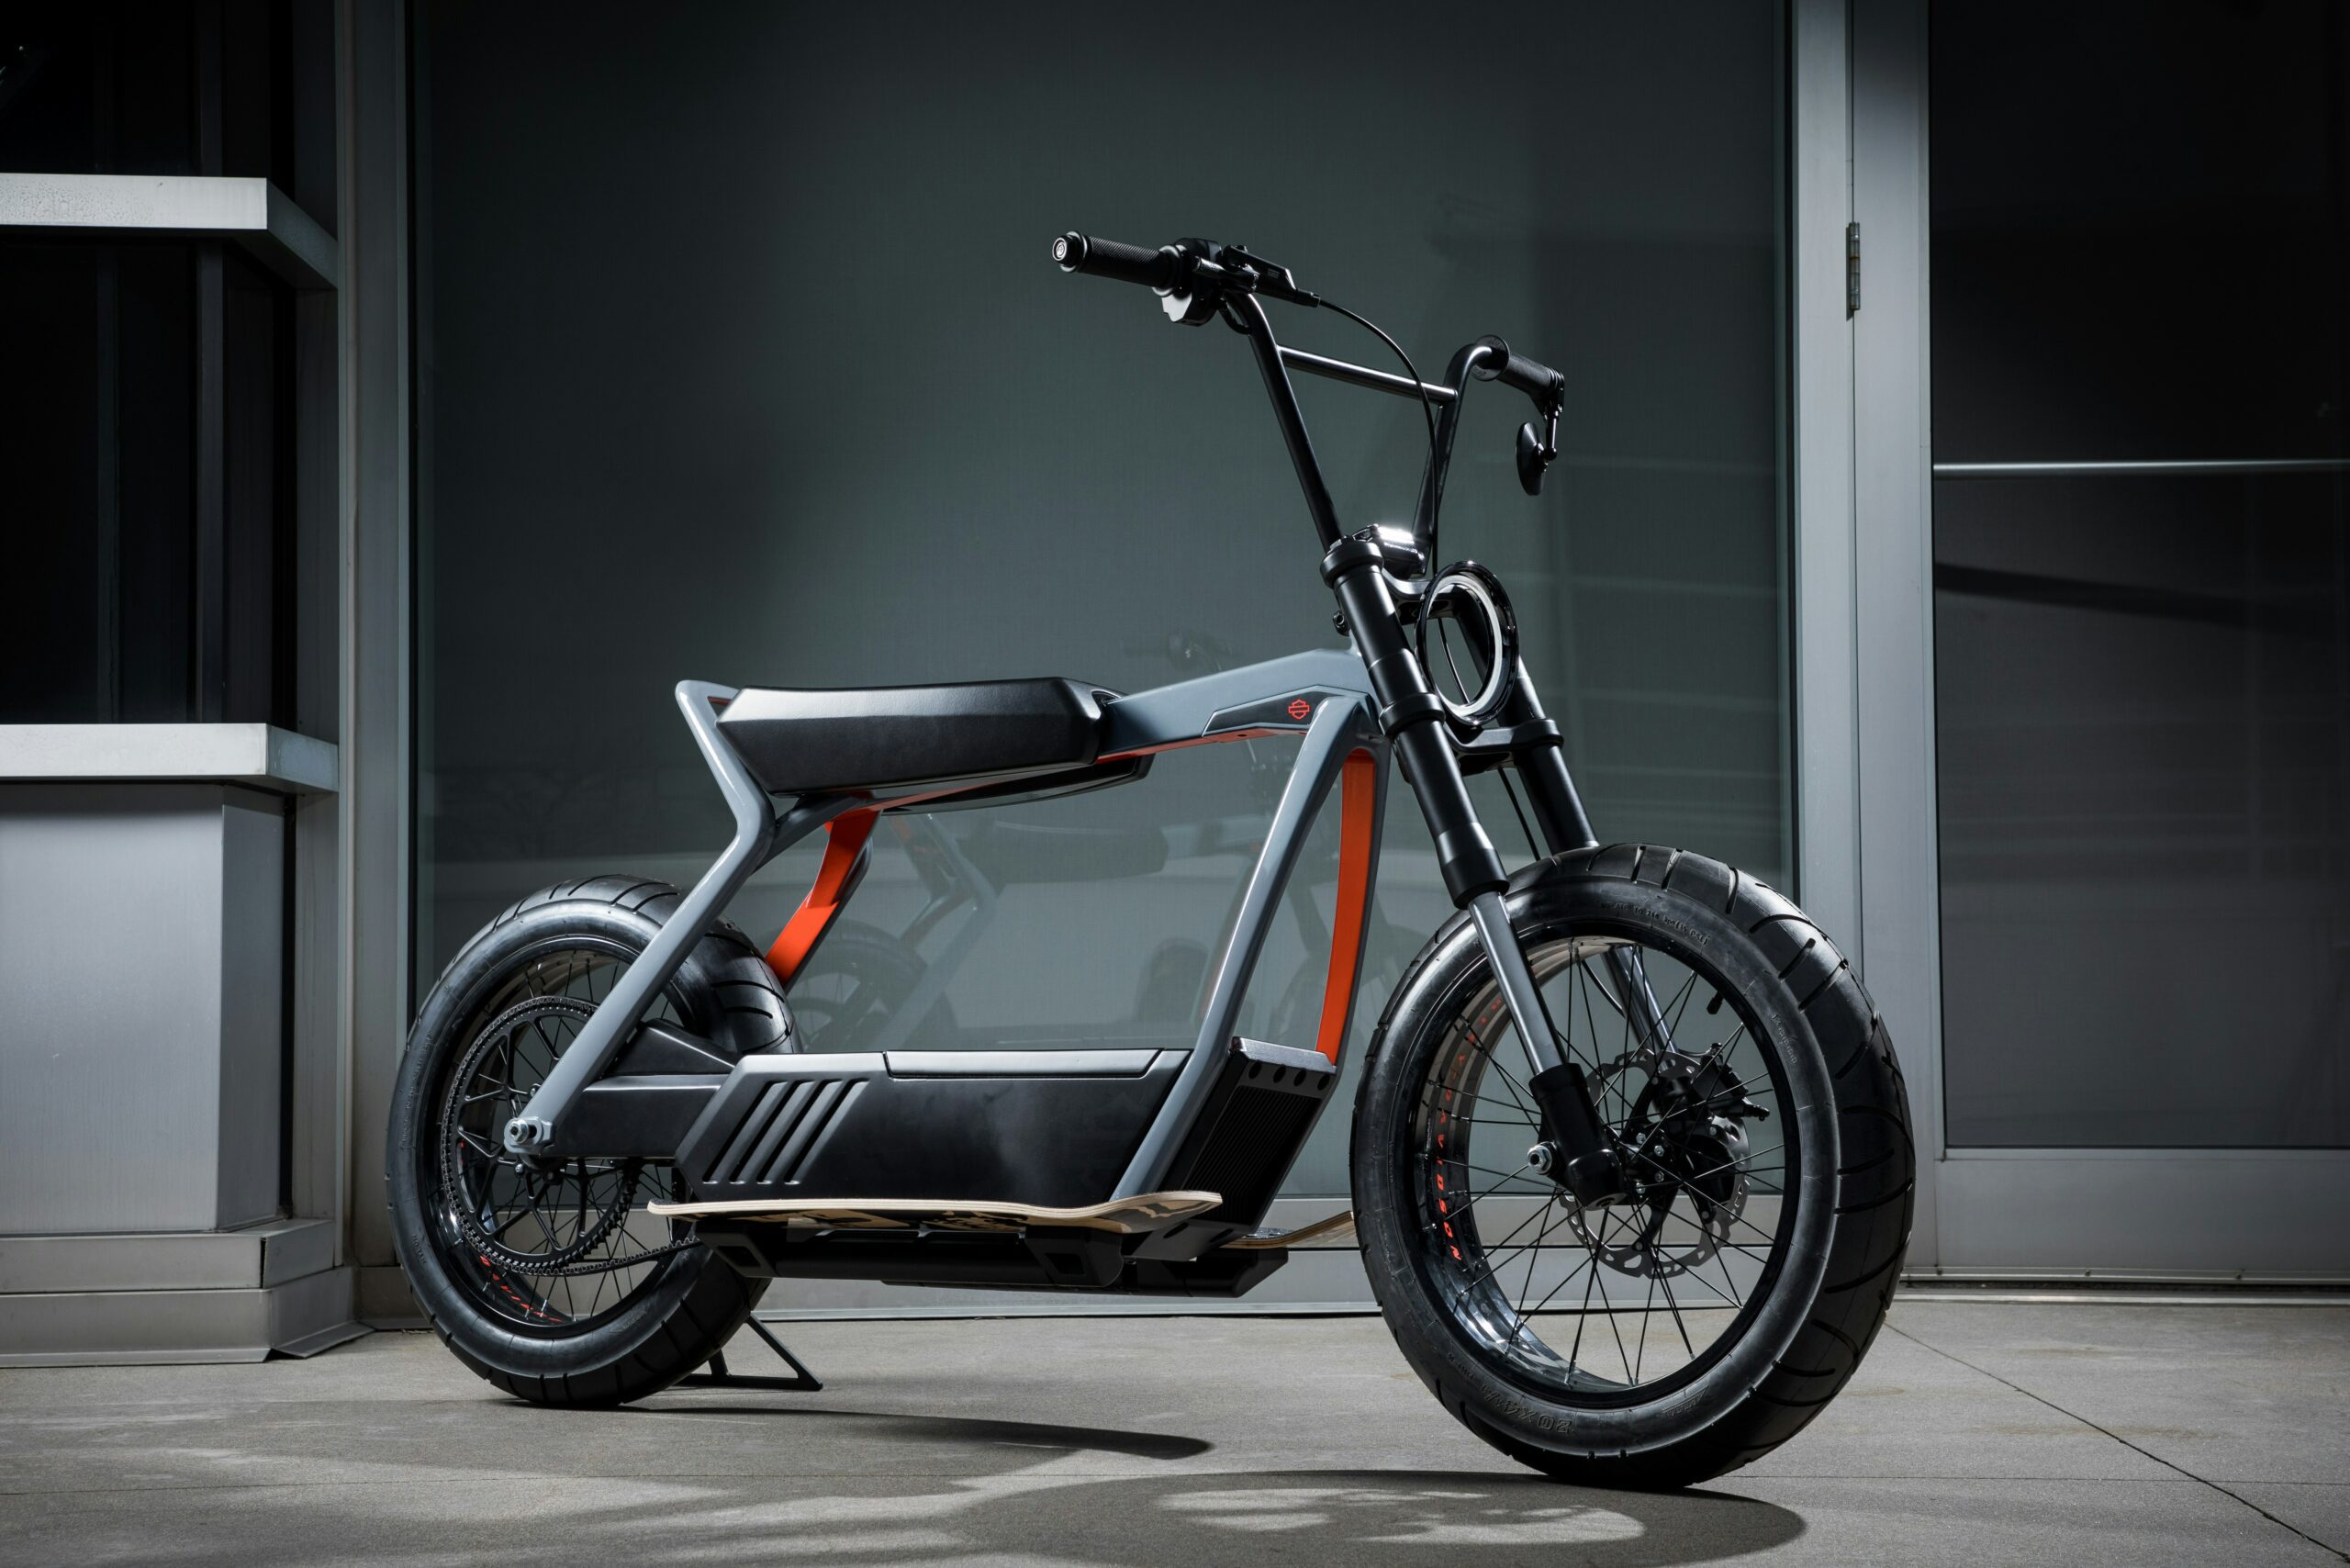 An electric motorcycle